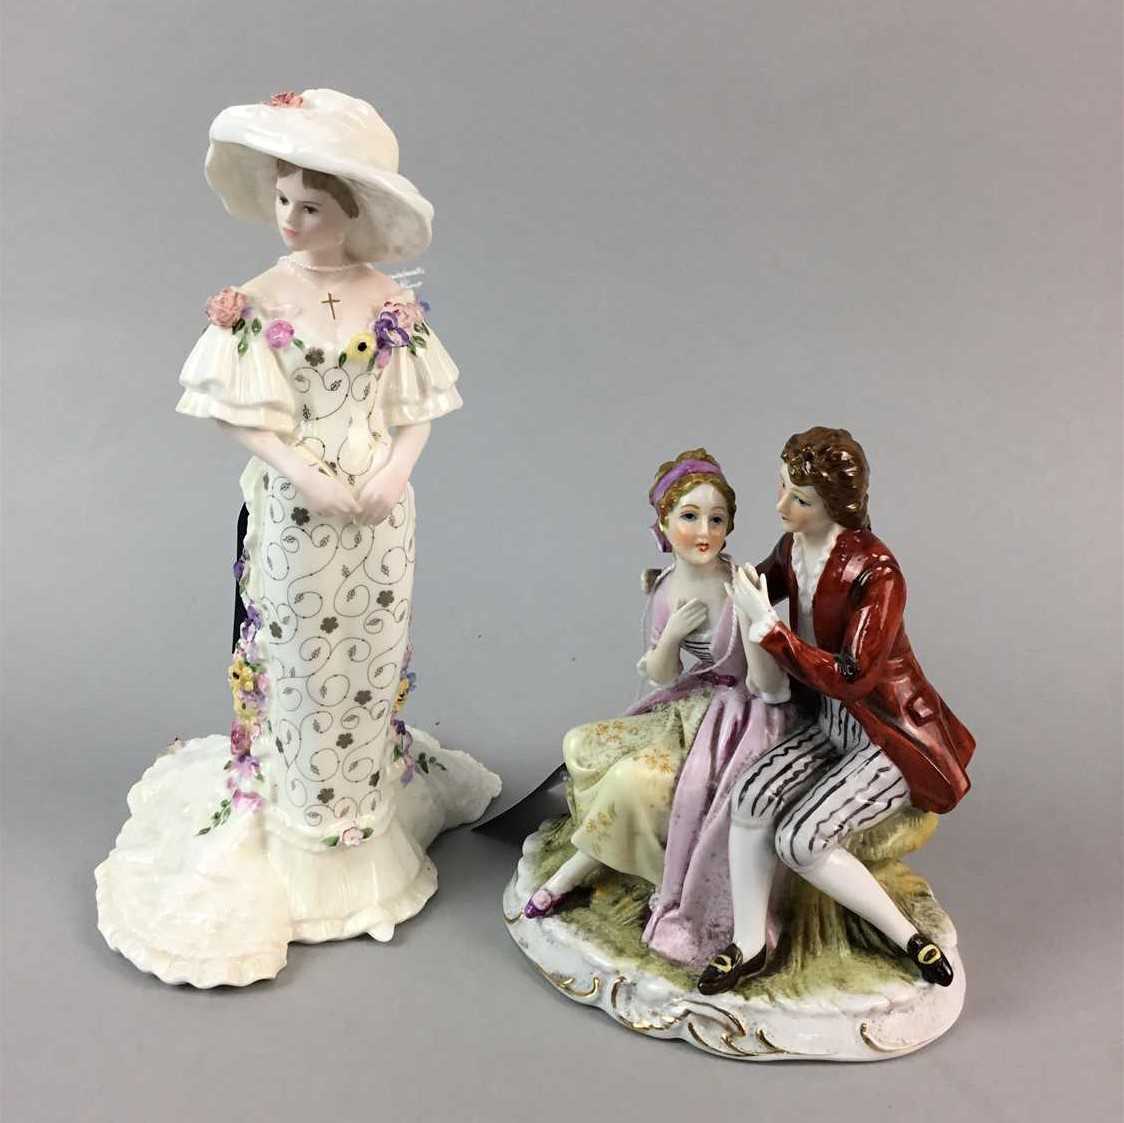 Lot 14 - A COALPORT FIGURE OF A LADY AND A CONTINENTAL FIGURE GROUP